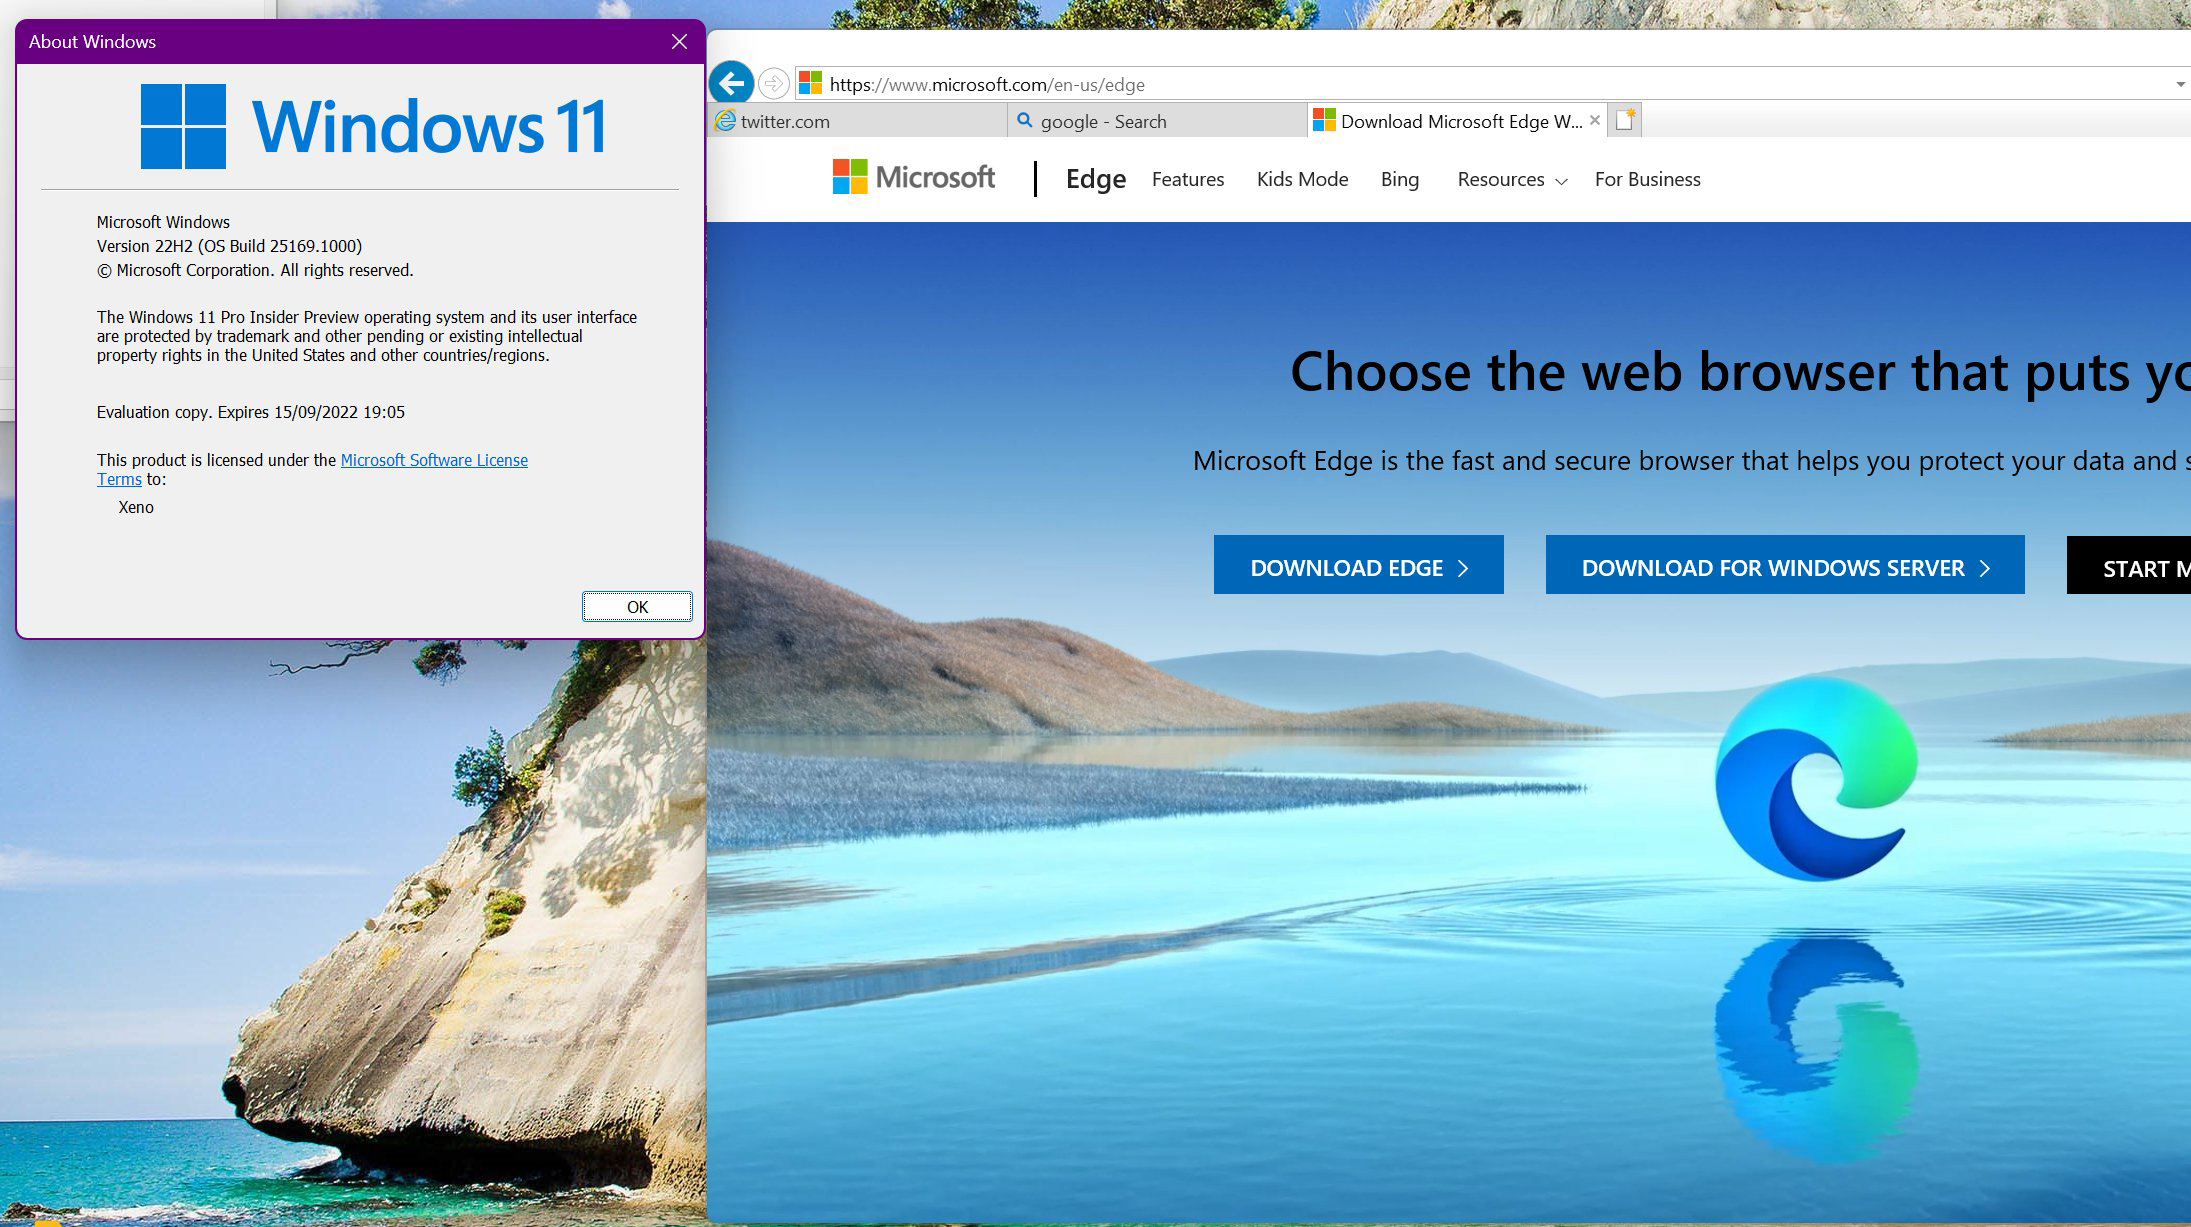 Somehow Internet Explorer lives on deep in the bowels of Windows 11